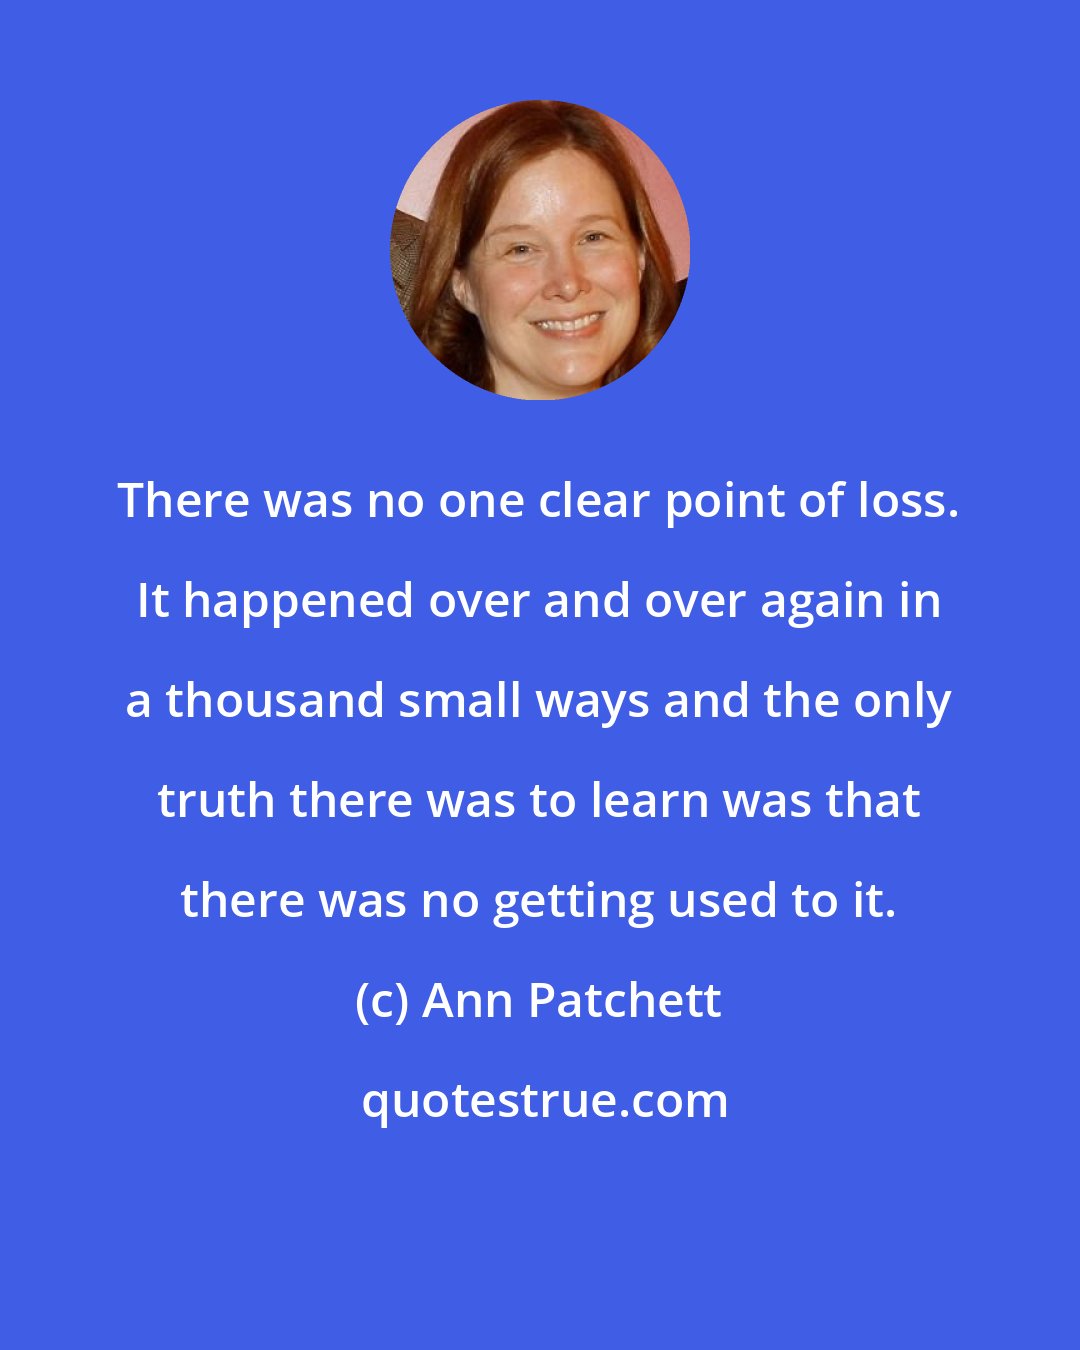 Ann Patchett: There was no one clear point of loss. It happened over and over again in a thousand small ways and the only truth there was to learn was that there was no getting used to it.